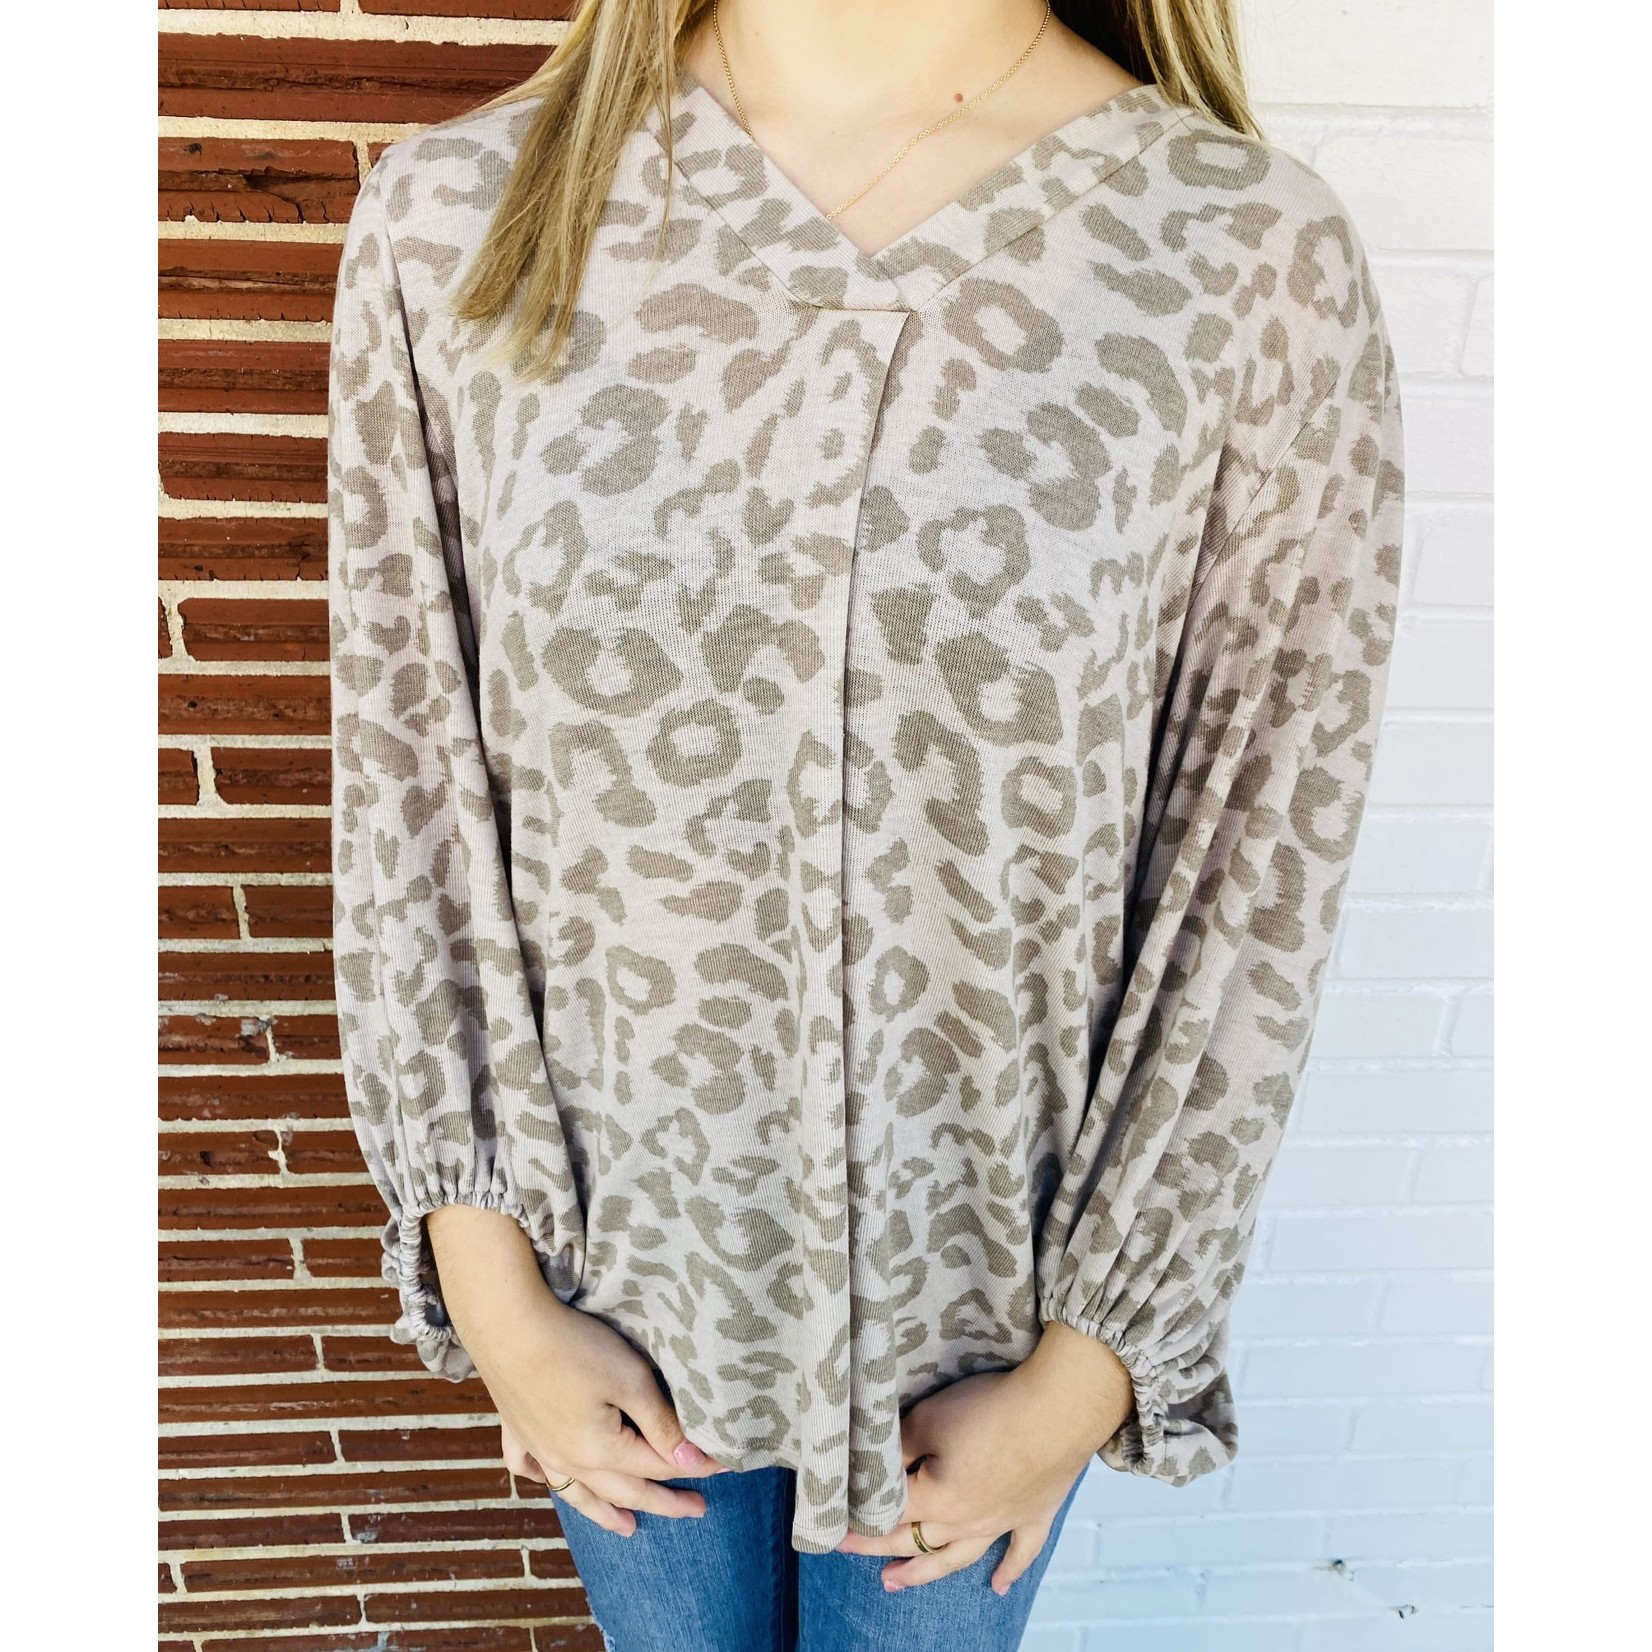 Jodifl Leopard Print Top With Bubble Sleeves - Sand